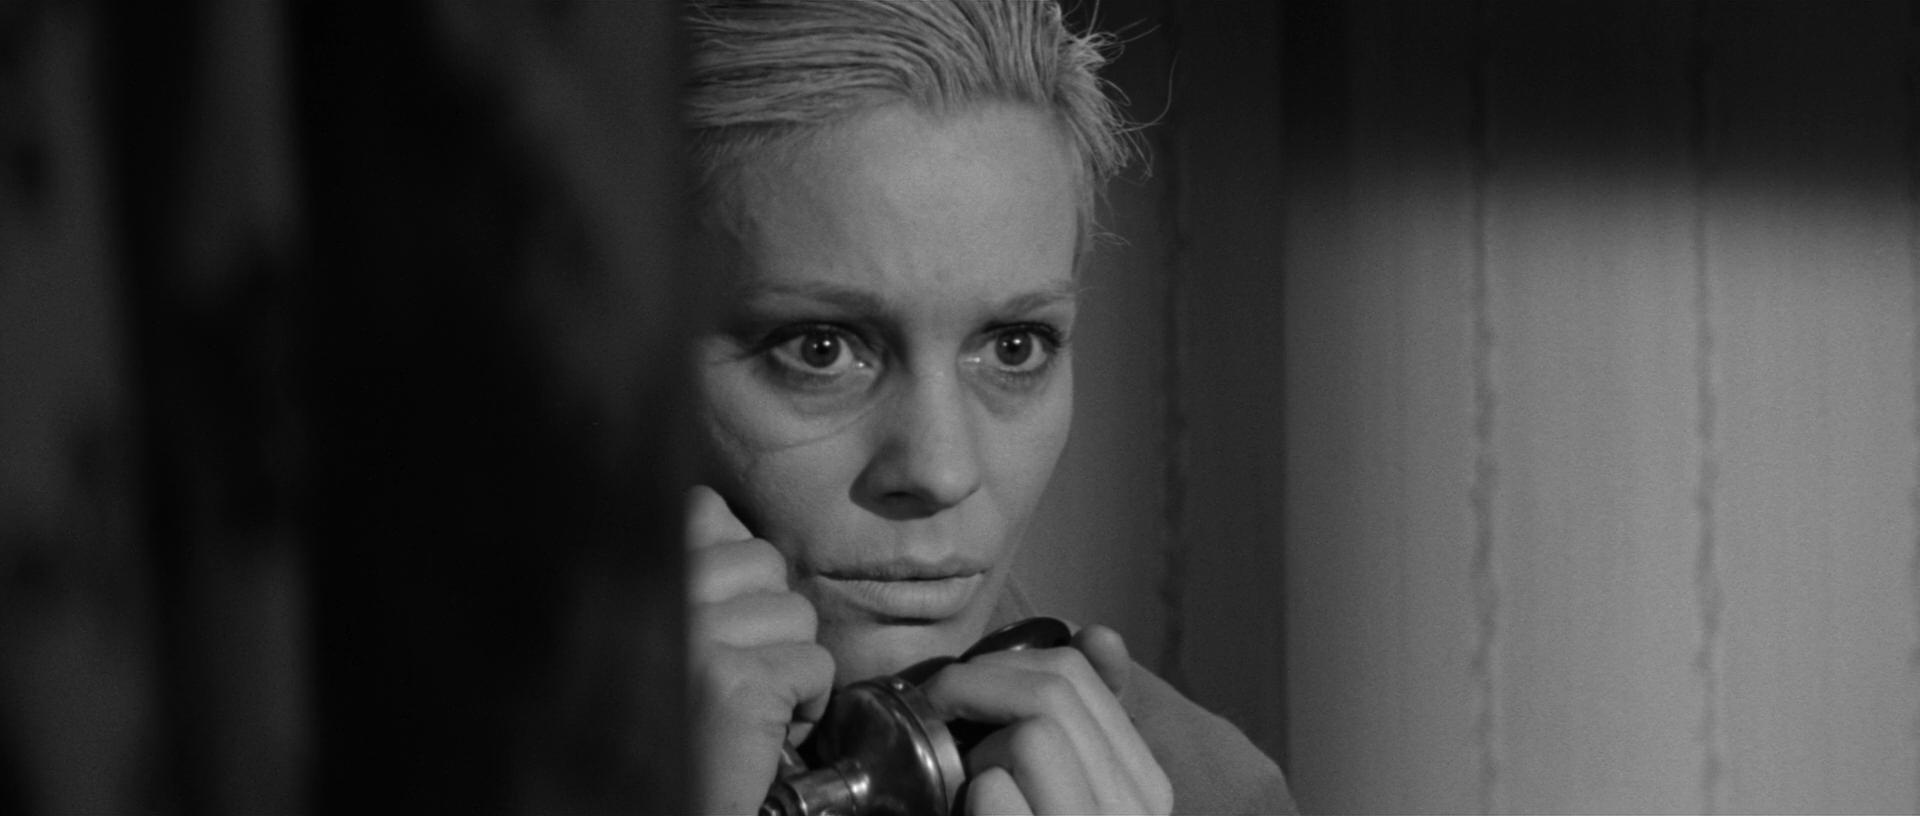 Return from the Ashes (1965) Screenshot 5 